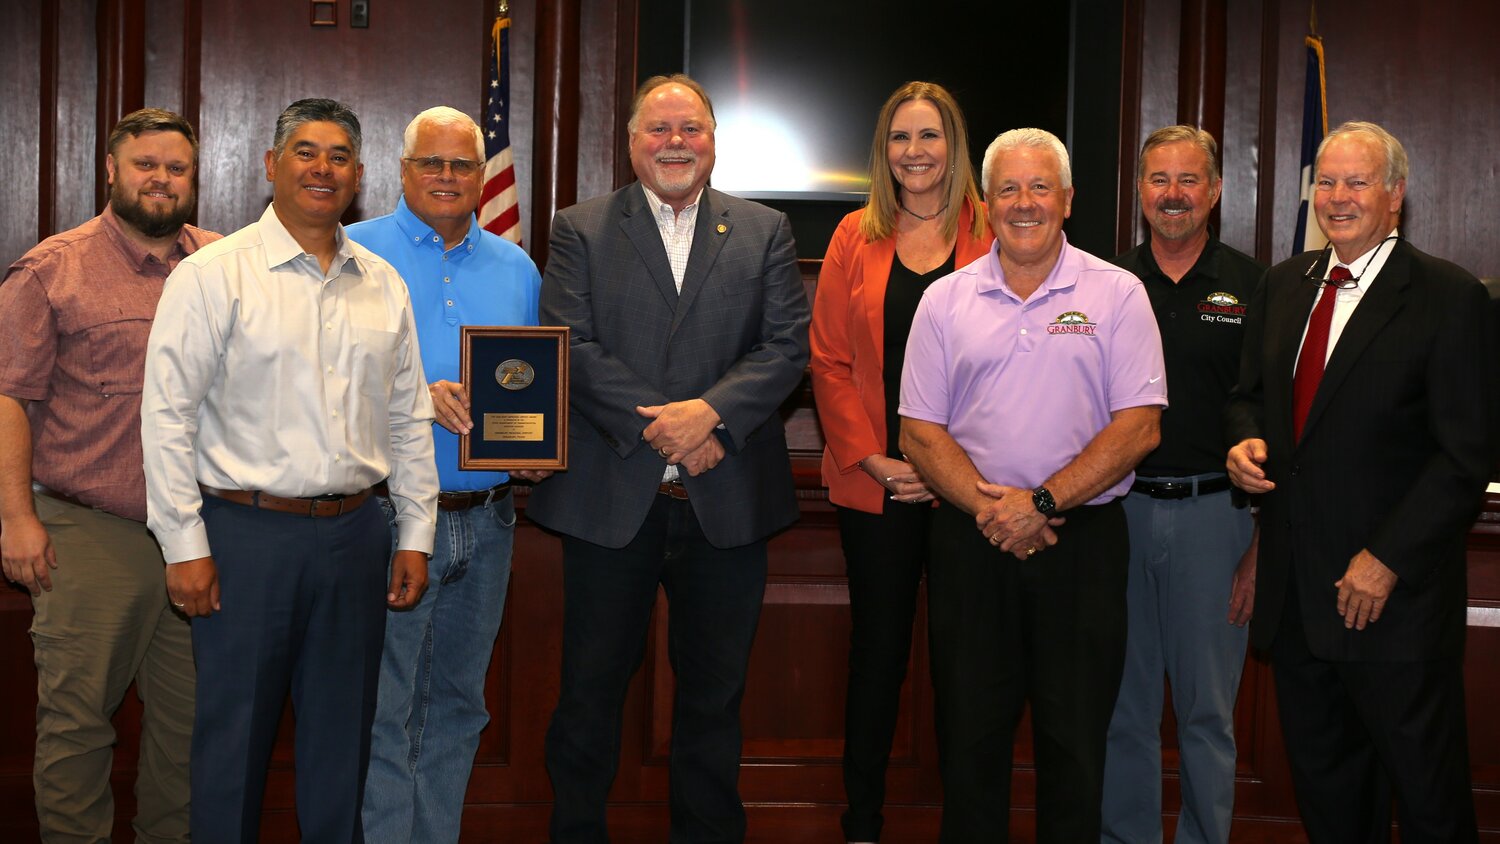 Members of the Granbury City Council joined City Manager Chris Coffman, center, Aviation Director Pat Stewart, third from left, and Deputy City Manager Michael Ross, third from right, in celebrating the award bestowed upon Granbury Regional Airport.